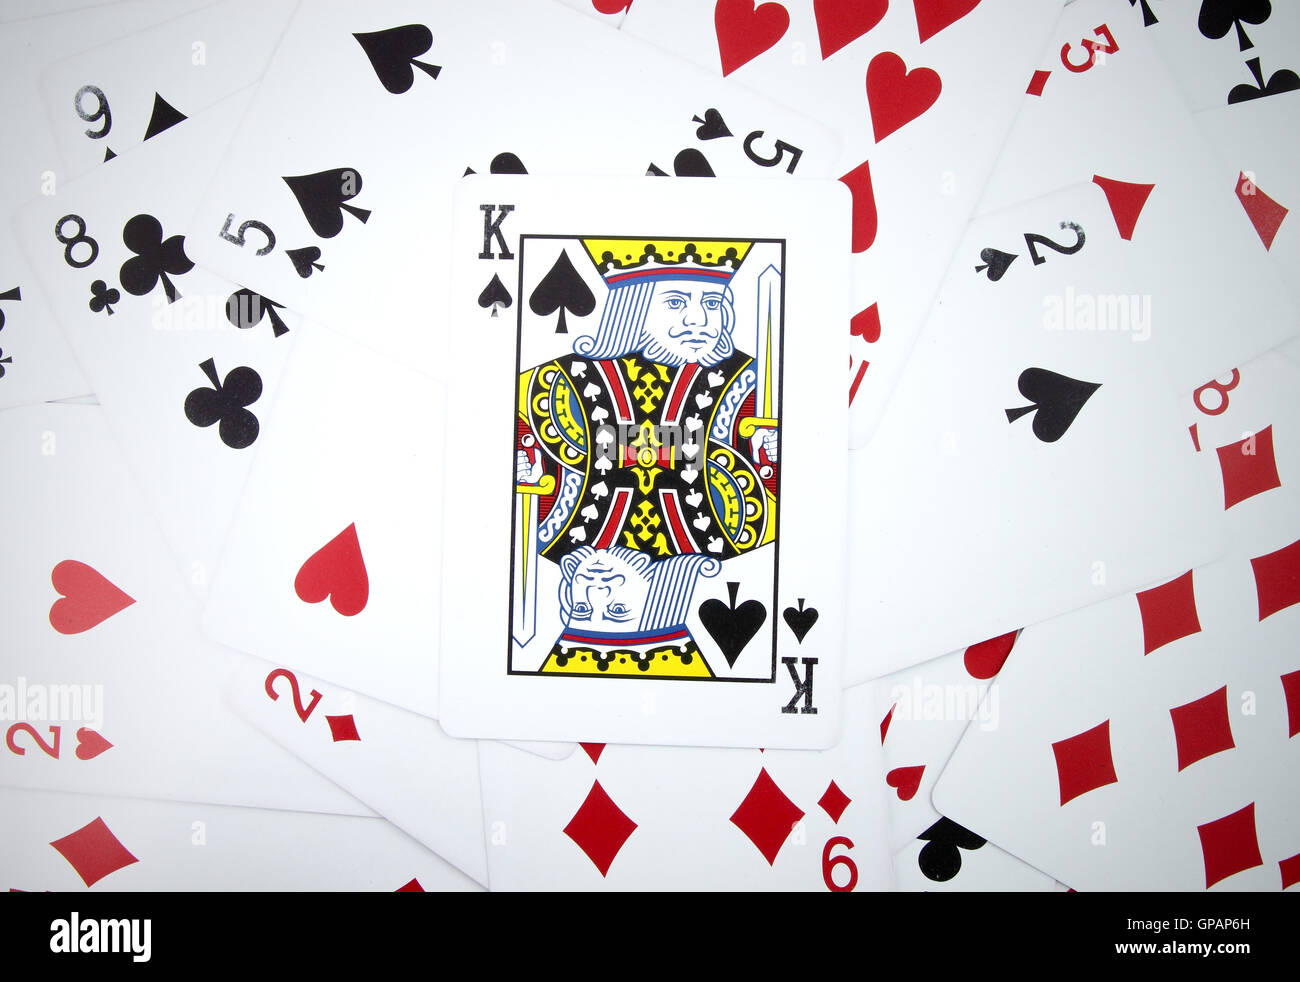 King card with playing cards background Stock Photo - Alamy